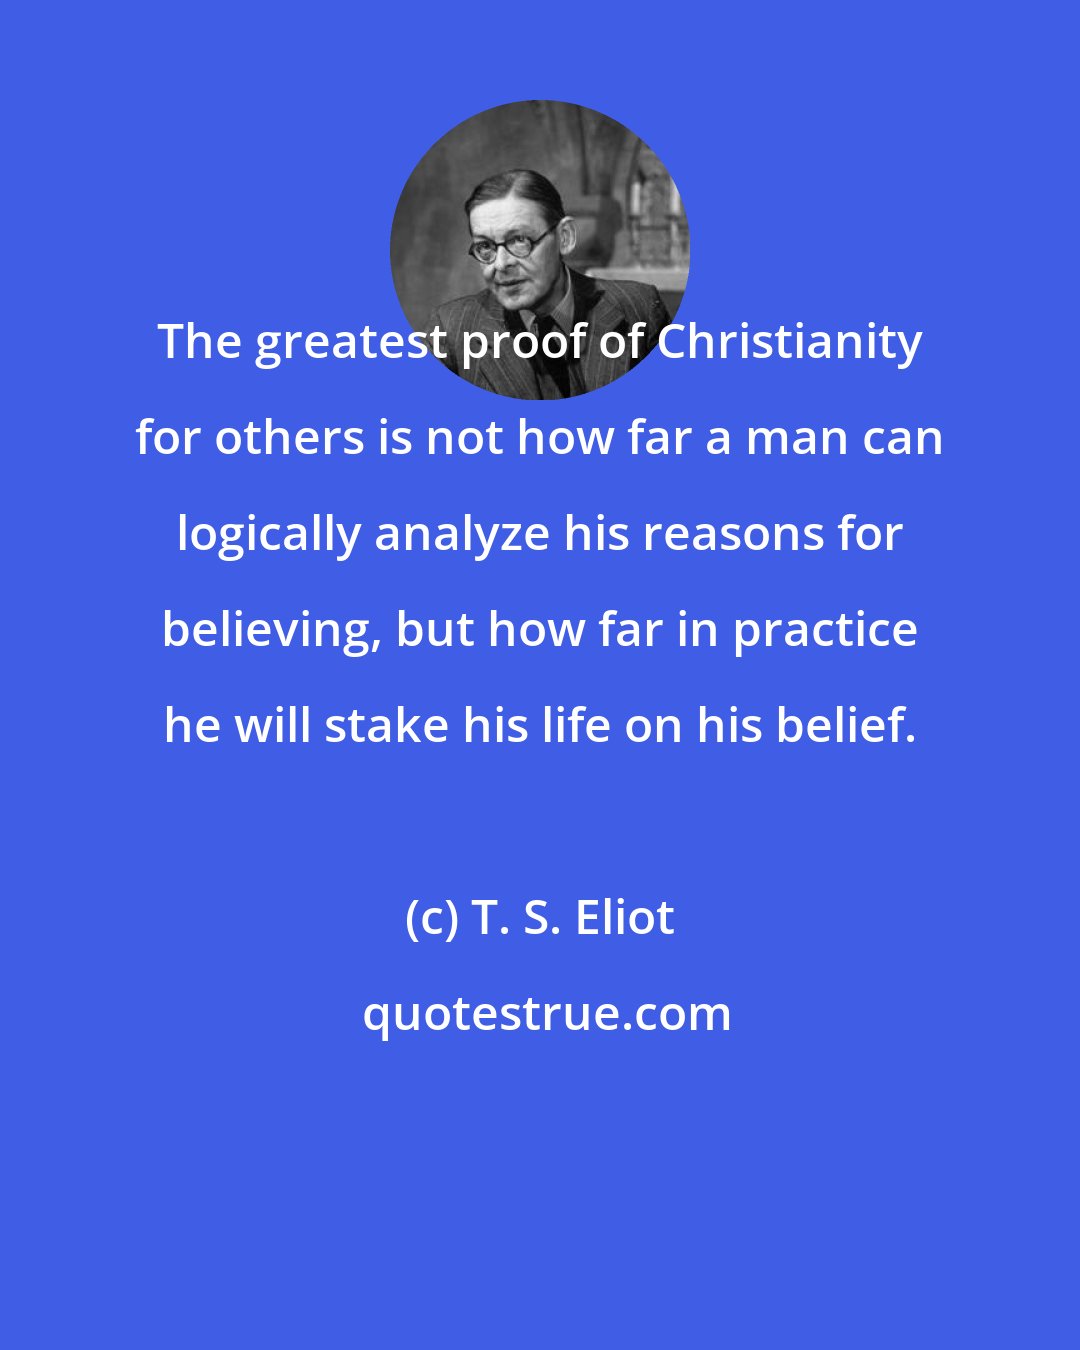 T. S. Eliot: The greatest proof of Christianity for others is not how far a man can logically analyze his reasons for believing, but how far in practice he will stake his life on his belief.